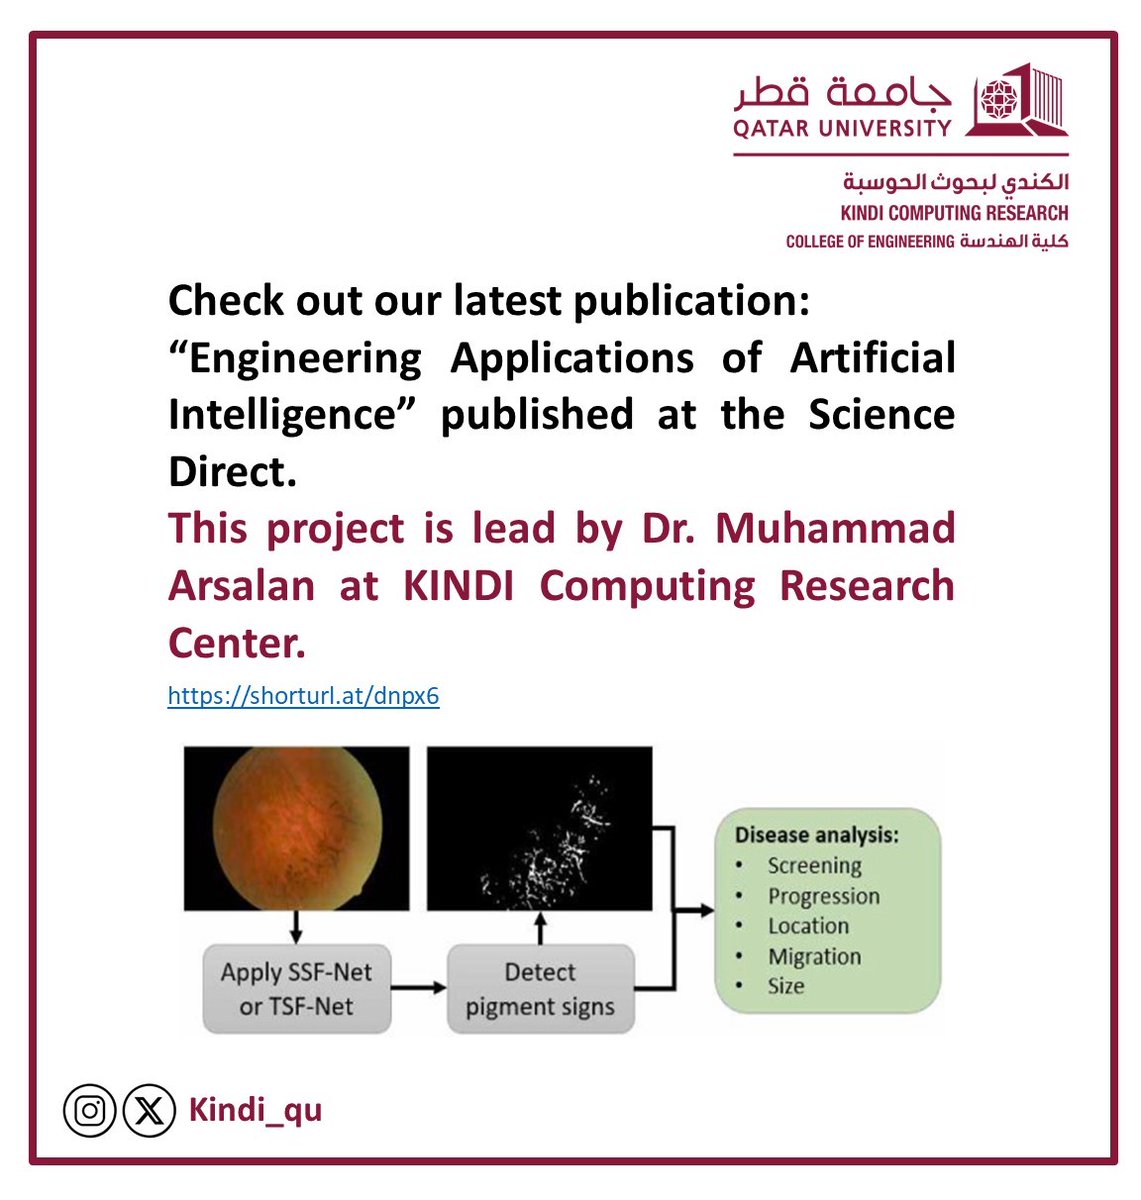 Check out our latest publication:

“EngineeringApplications of Artificial Intelligence” published at the Science Direct.

This project is lead by Dr. Muhammad Arsalan at KINDI Computing Research Center 💻

shorturl.at/dnpx6